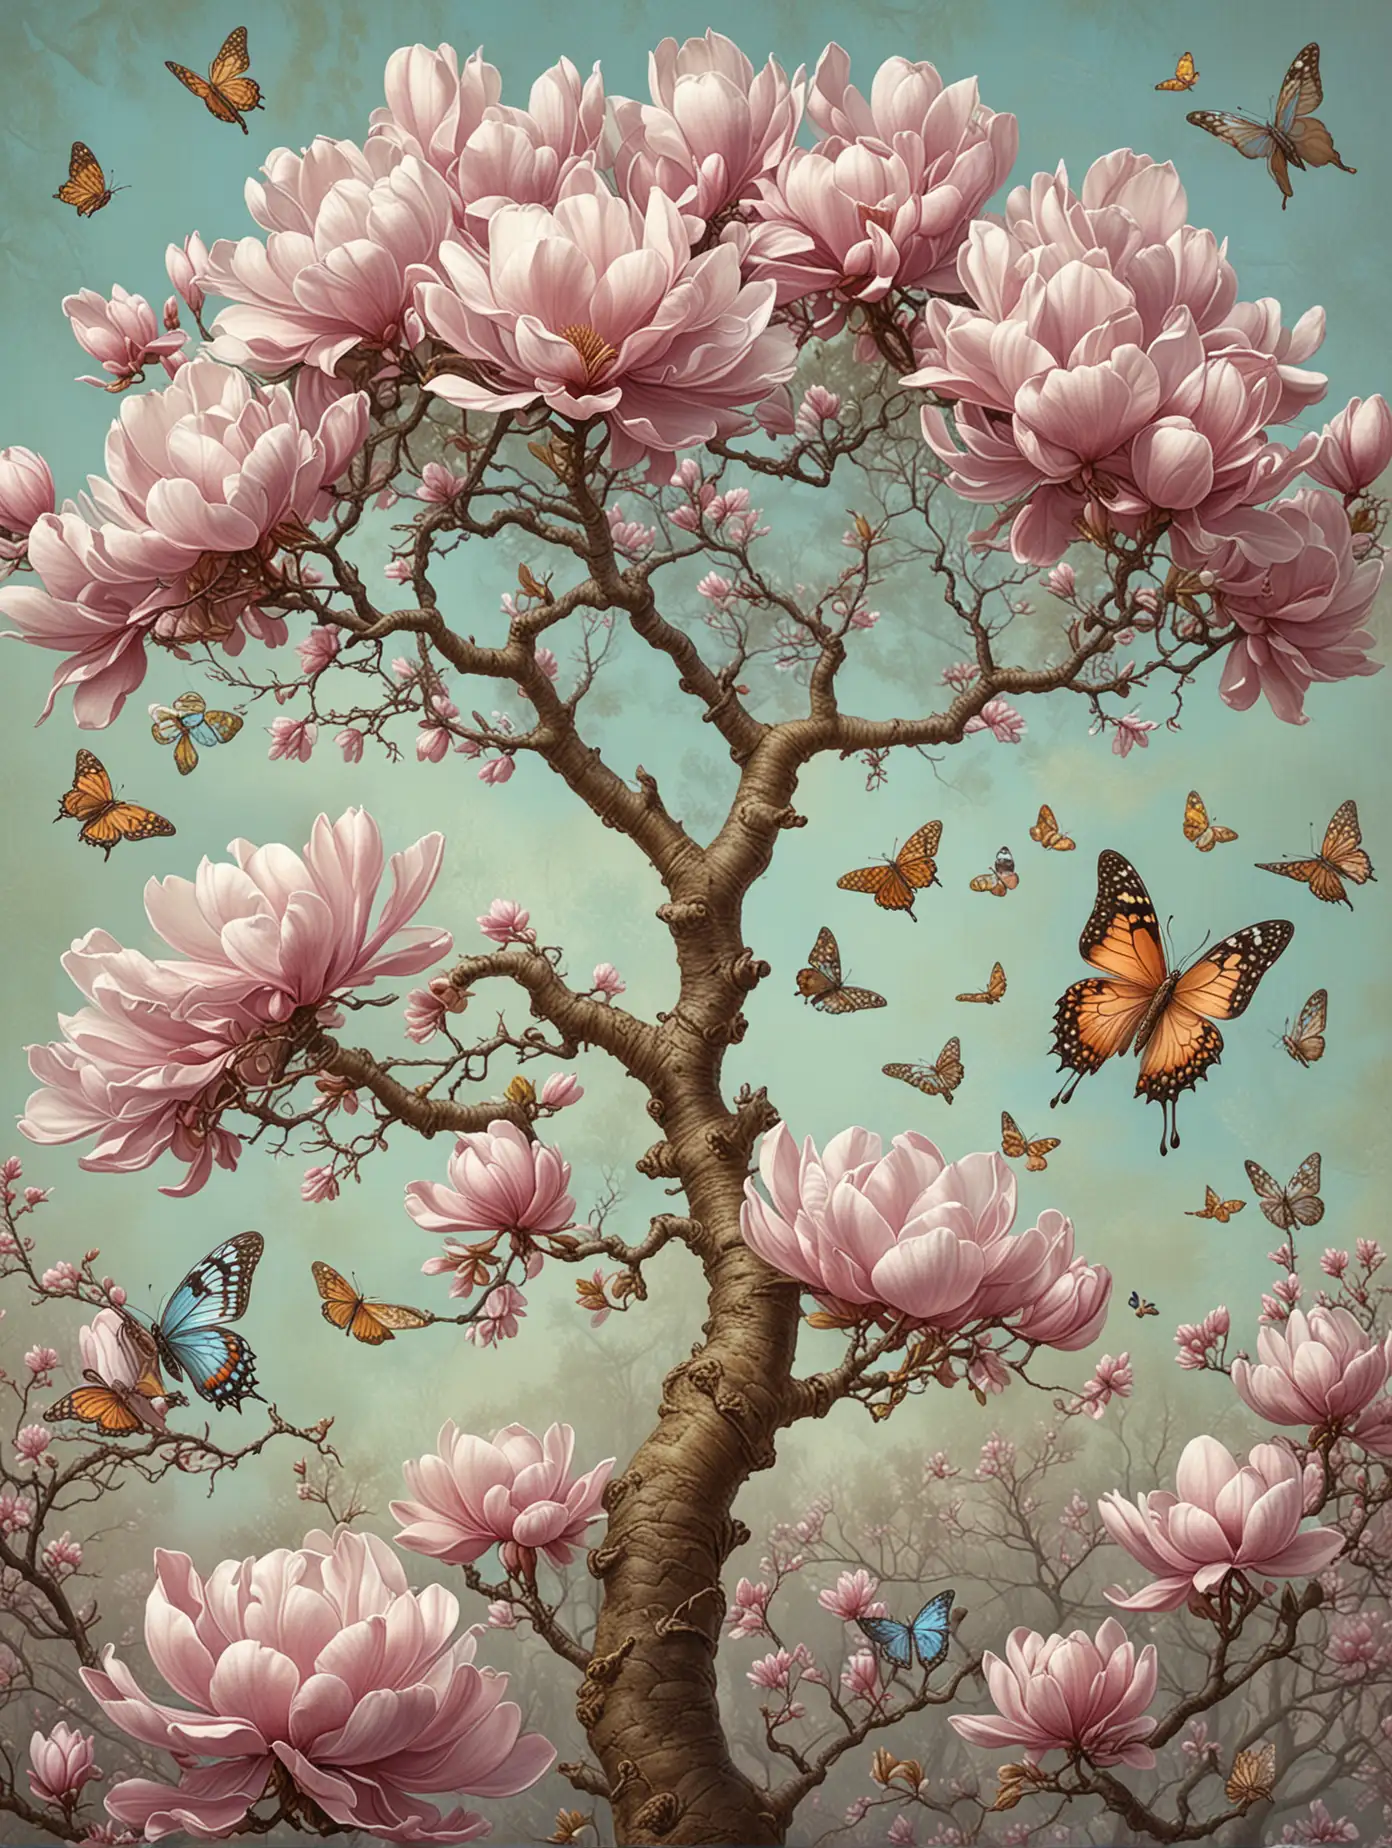 magnolia trees, branches and blossoms, pastel colors, vintage, kerem beyit, by Daniel Merriam, esao andrews, ornate, by Kerembeyit, inspired by Daniel Merriam, by Jan Kip, daniel merriam, butterflies, day fly, bees, highly detailed digital artwork, antique, vintage, dusty, and rugged illustration